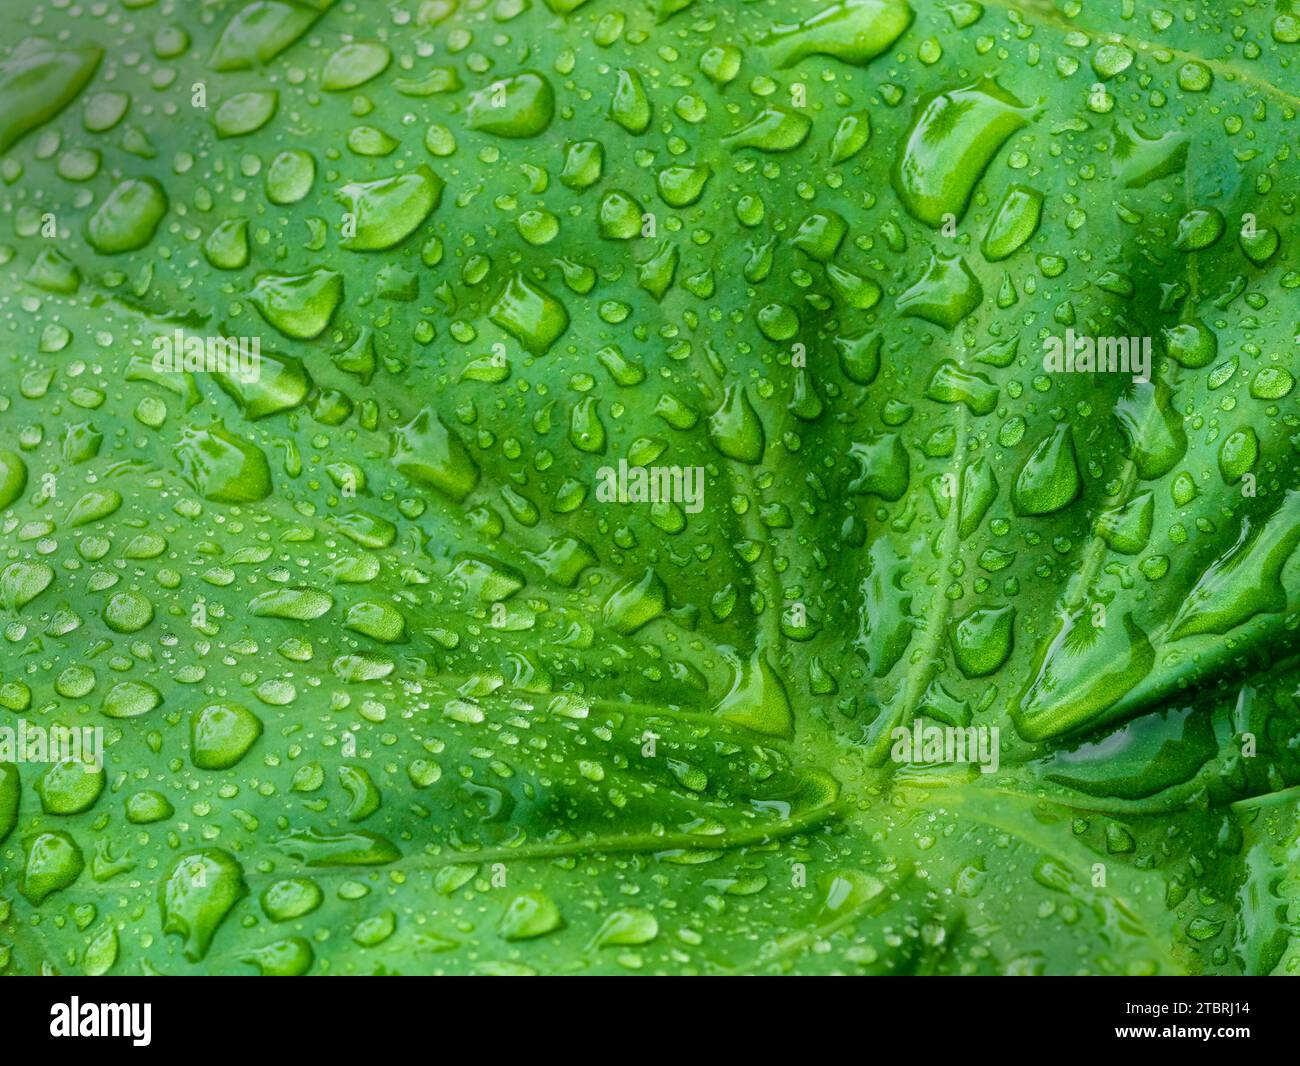 Rain droplets on a green leaf, close-up Stock Photo